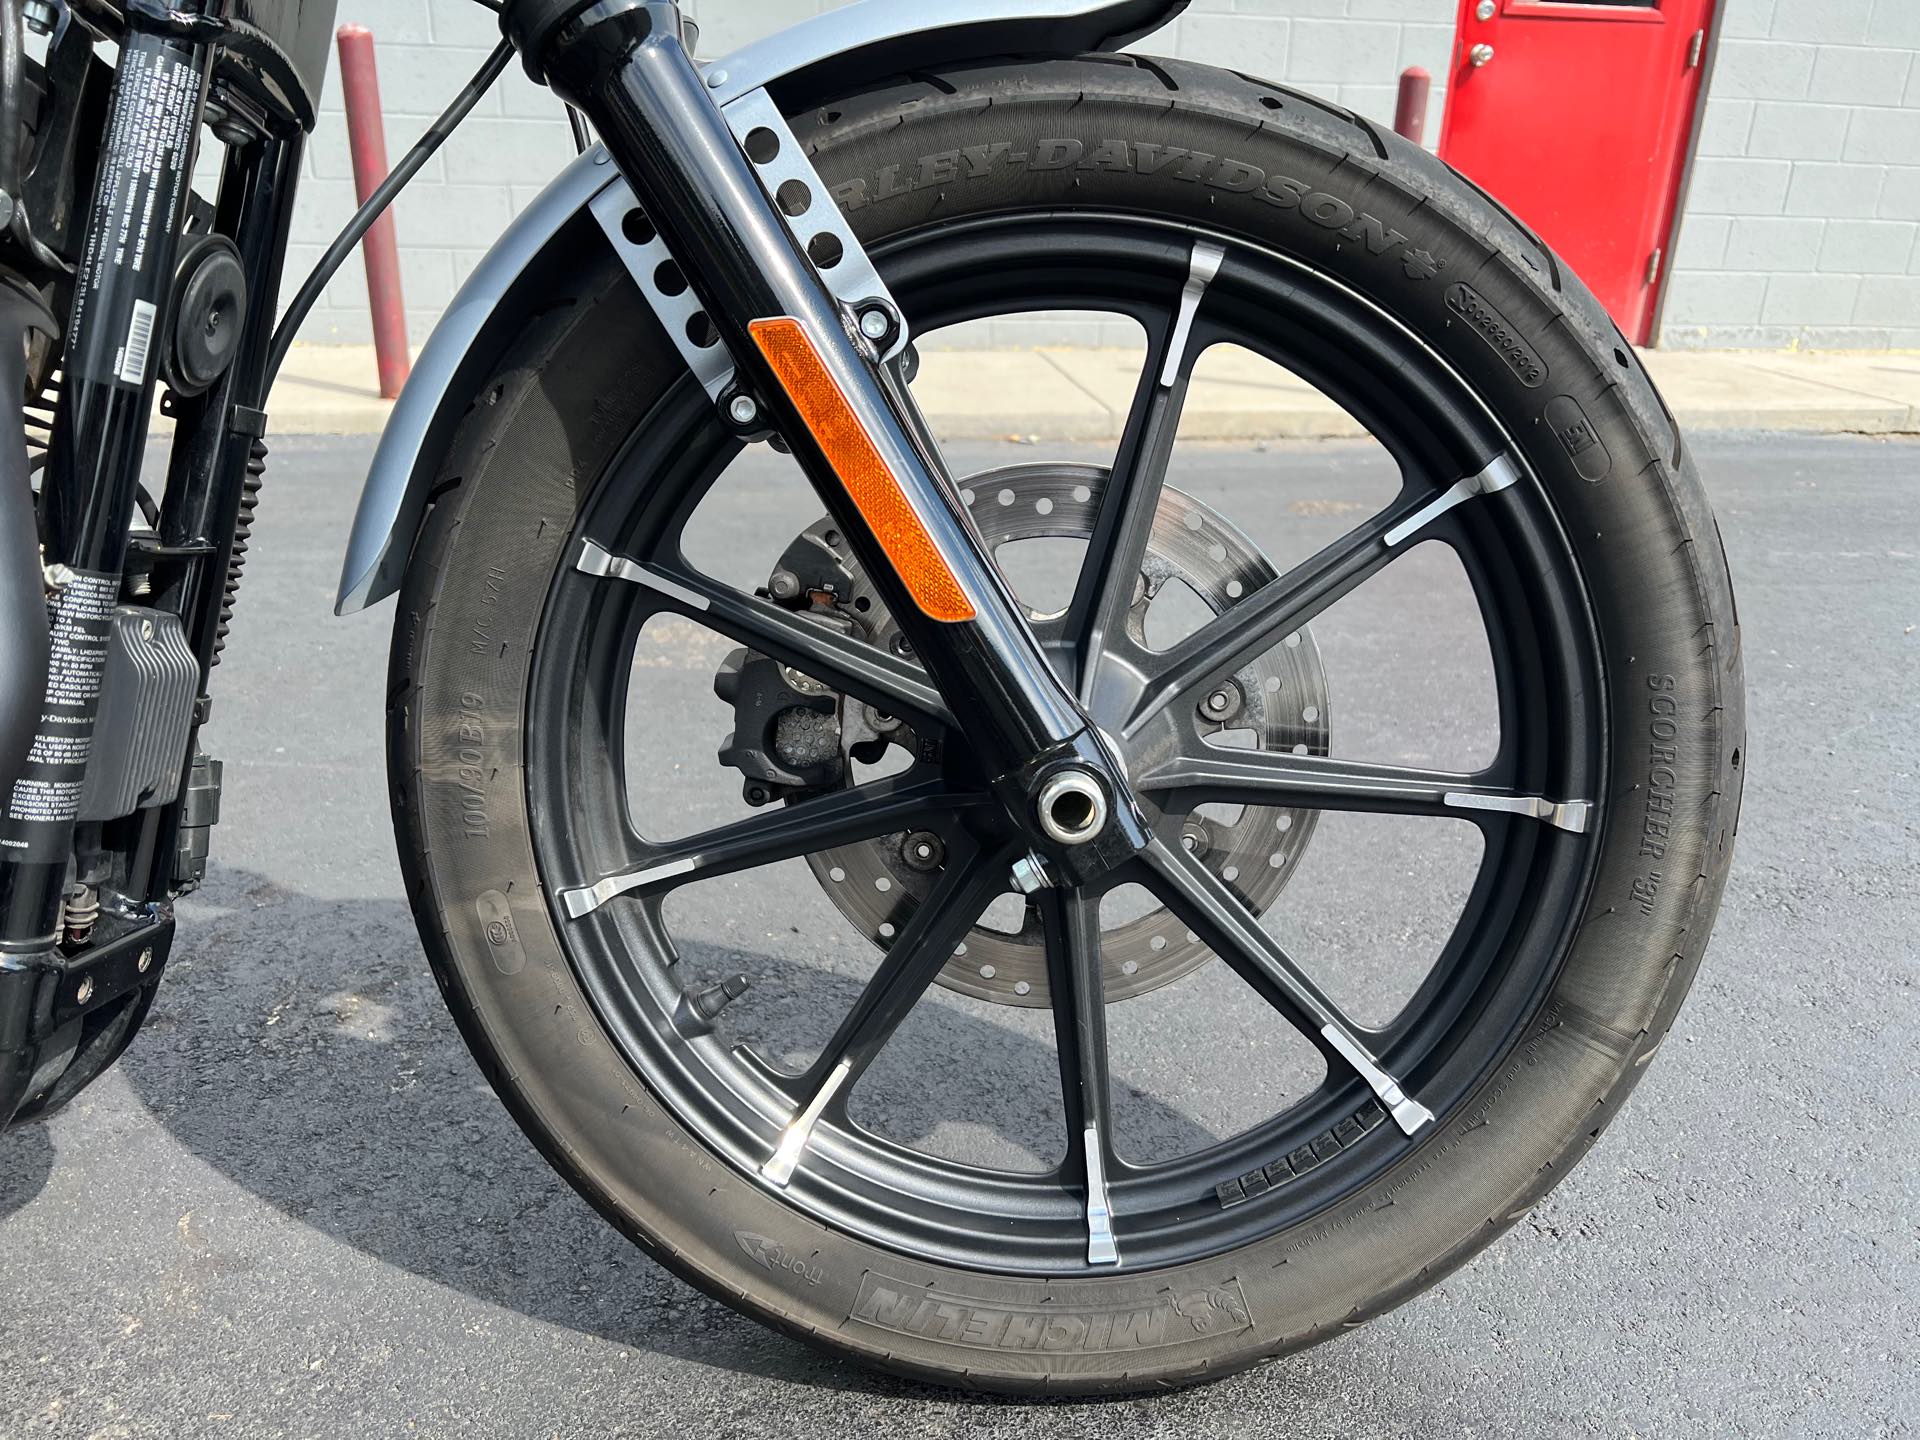 2020 Harley-Davidson Sportster Iron 883 at Aces Motorcycles - Fort Collins